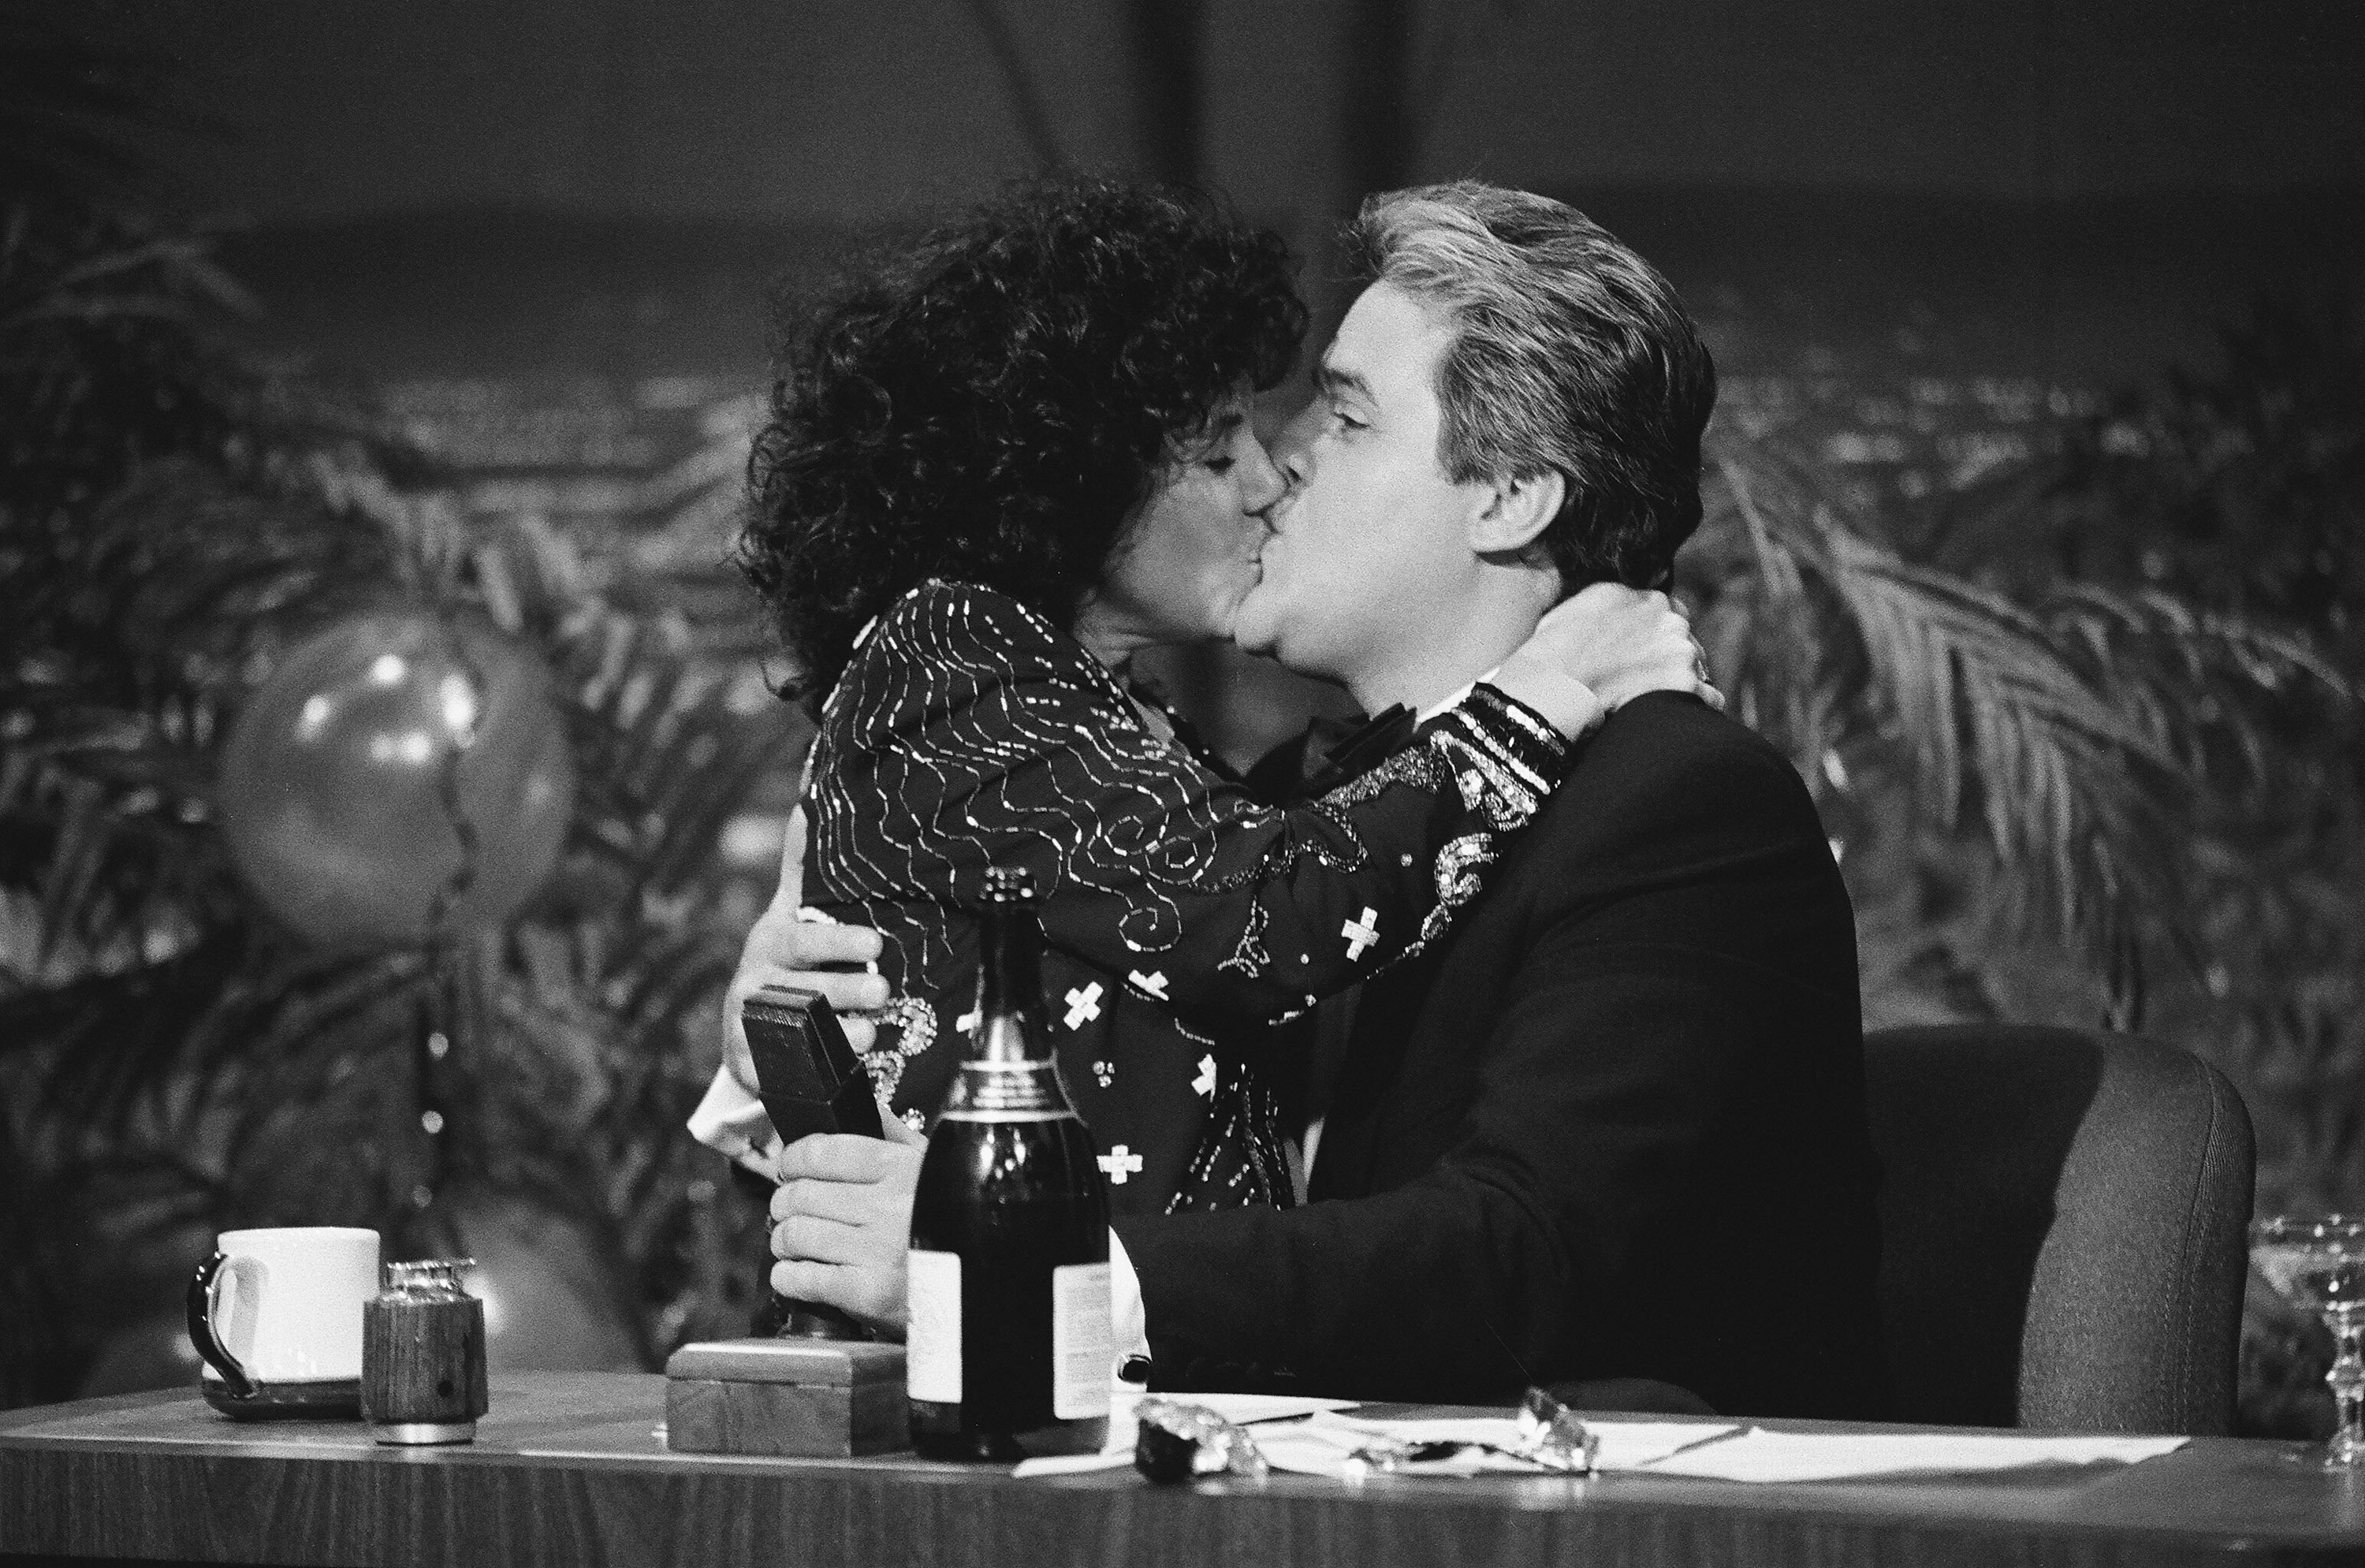 Mavis and Jay Leno on season 29 of "The Tonight Show Starring Johnny Carson" on December 31, 1990. | Source: Getty Images